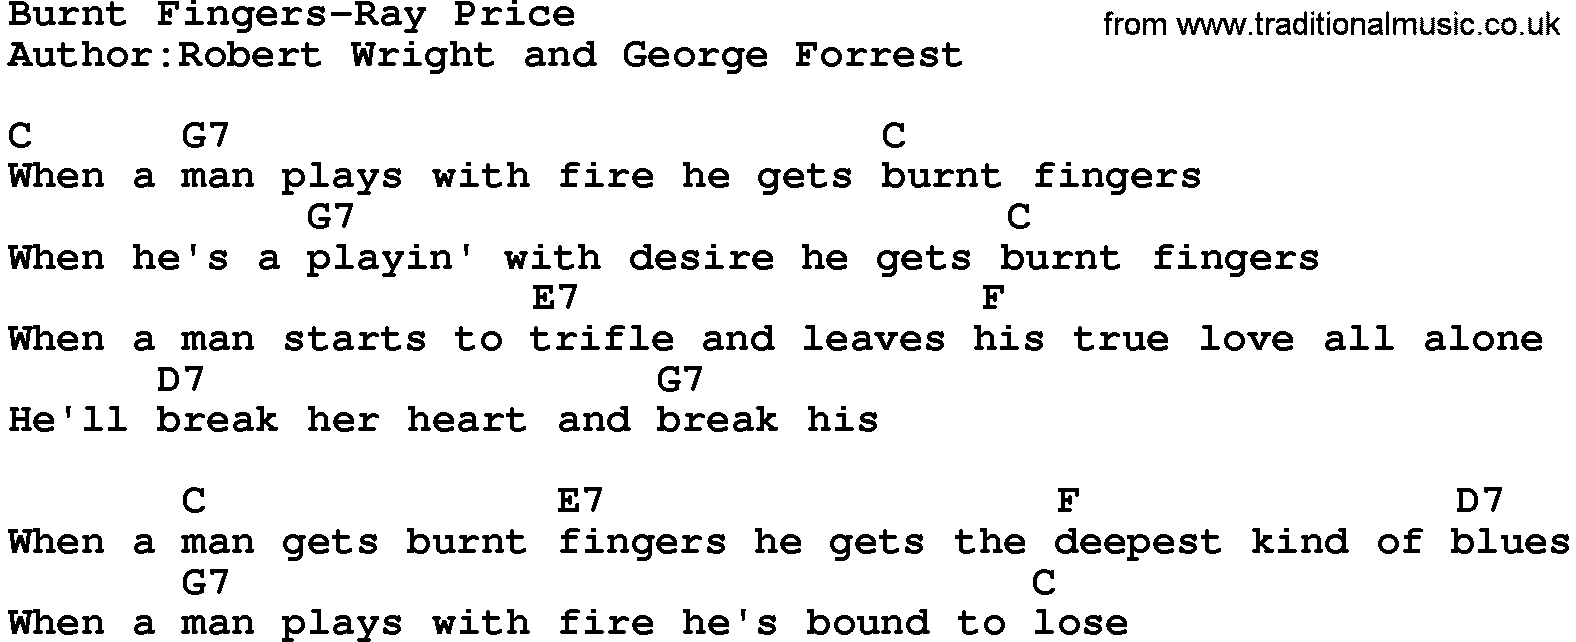 Country music song: Burnt Fingers-Ray Price lyrics and chords